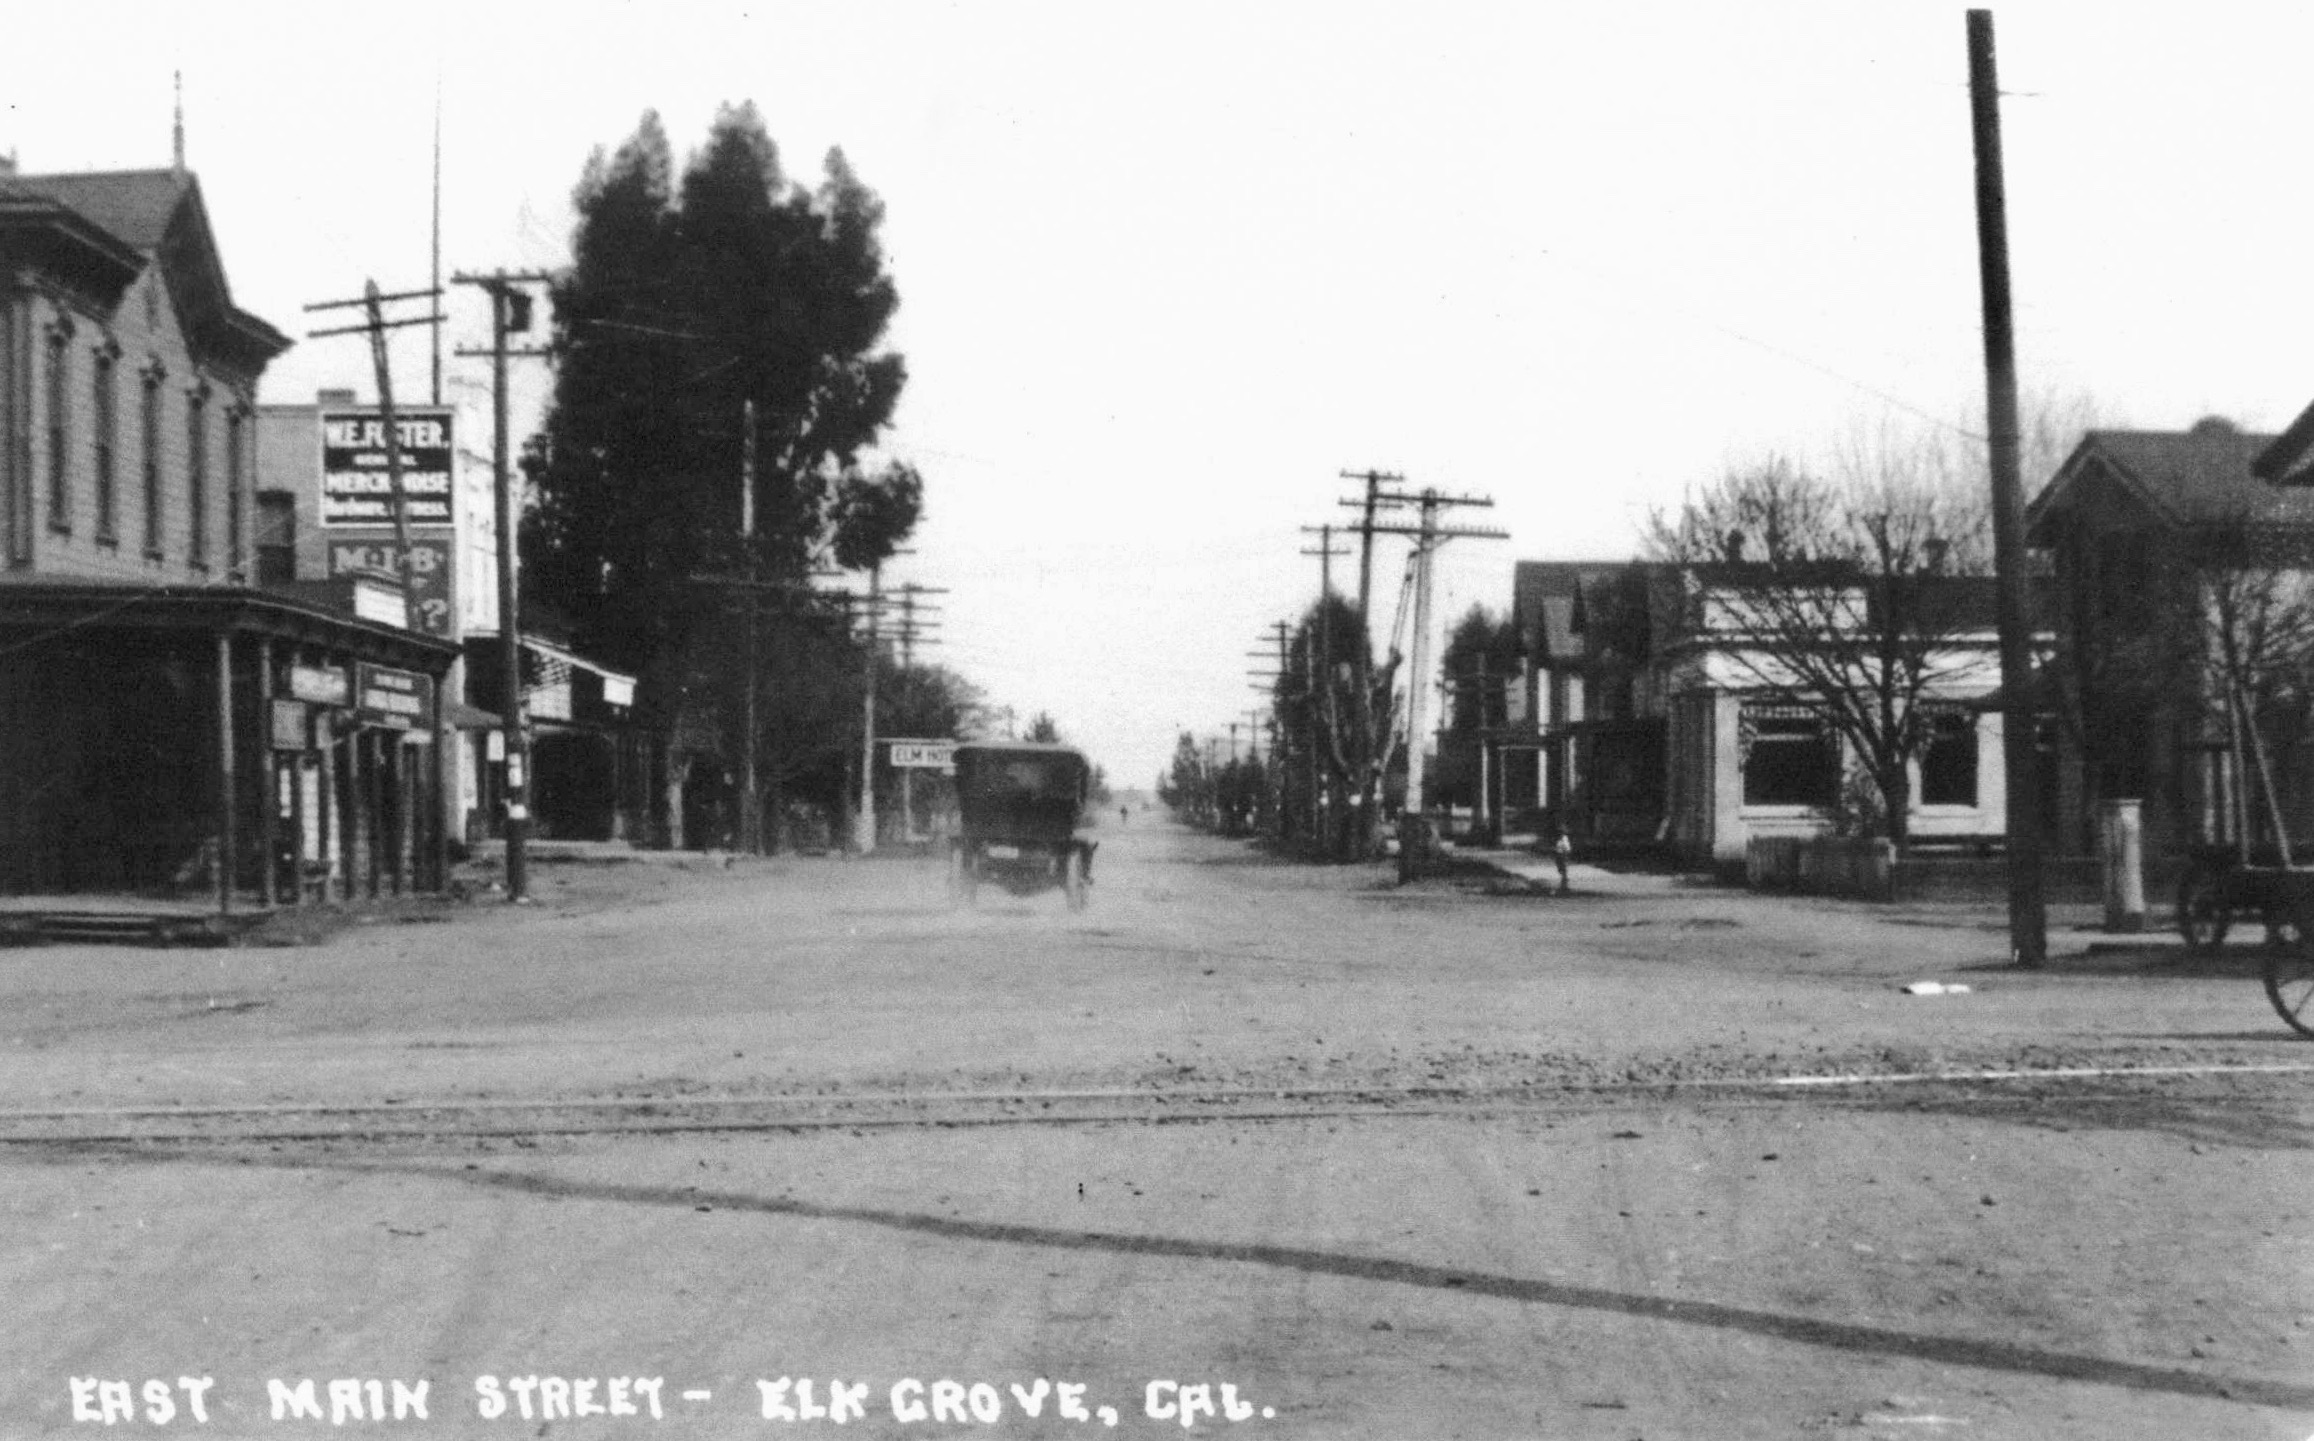 History Walking Tour Of Old Elk Grove And History Of Old Buildings